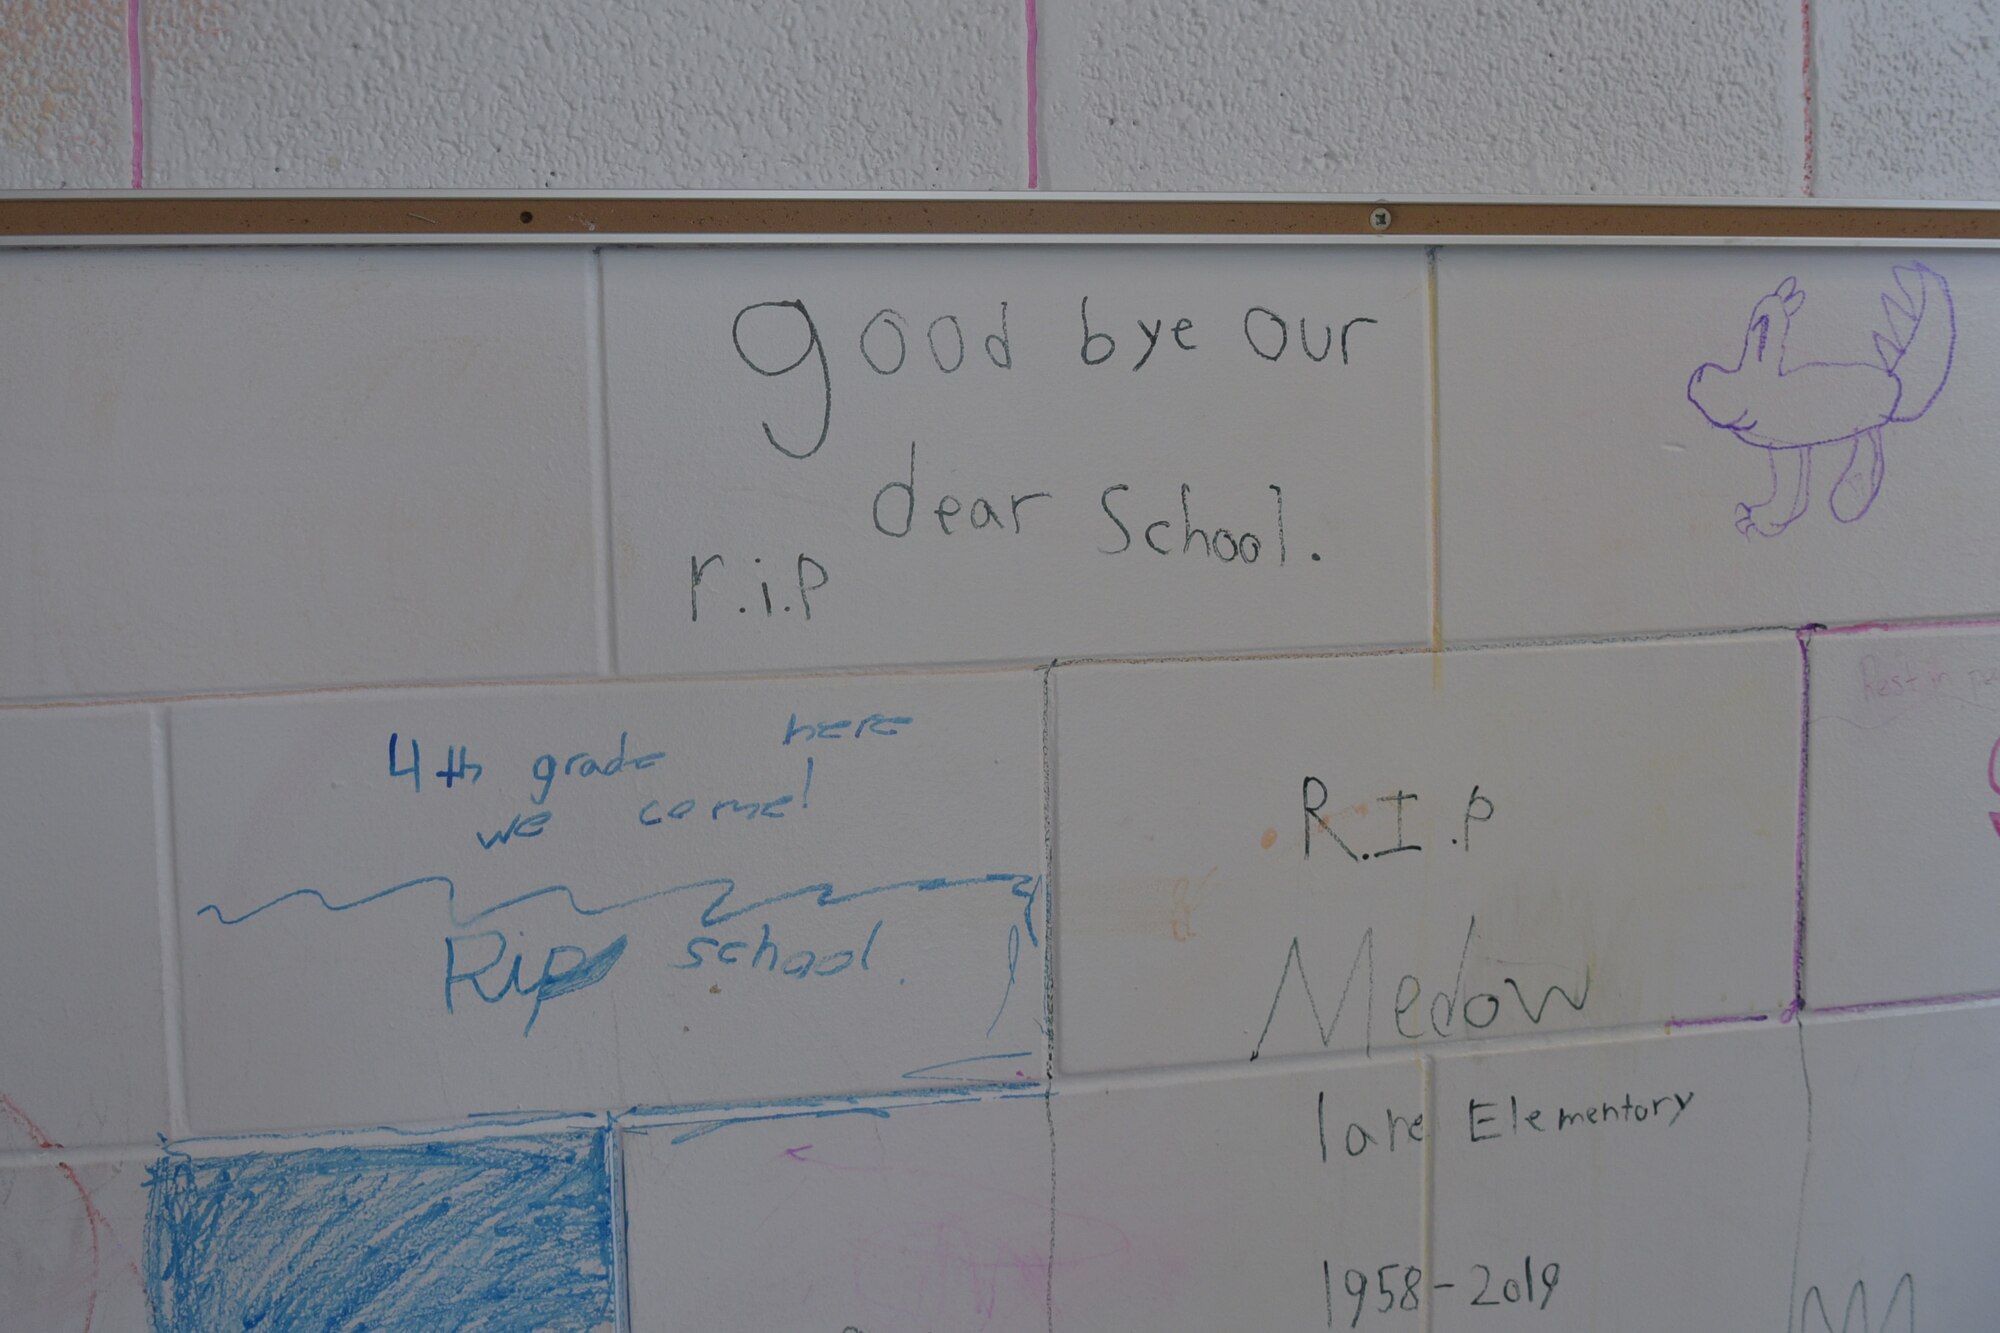 Student artwork and drawings decorate the wall of the former Meadow Lane Elementary School June 14, 2019, in Goldsboro, North Carolina.